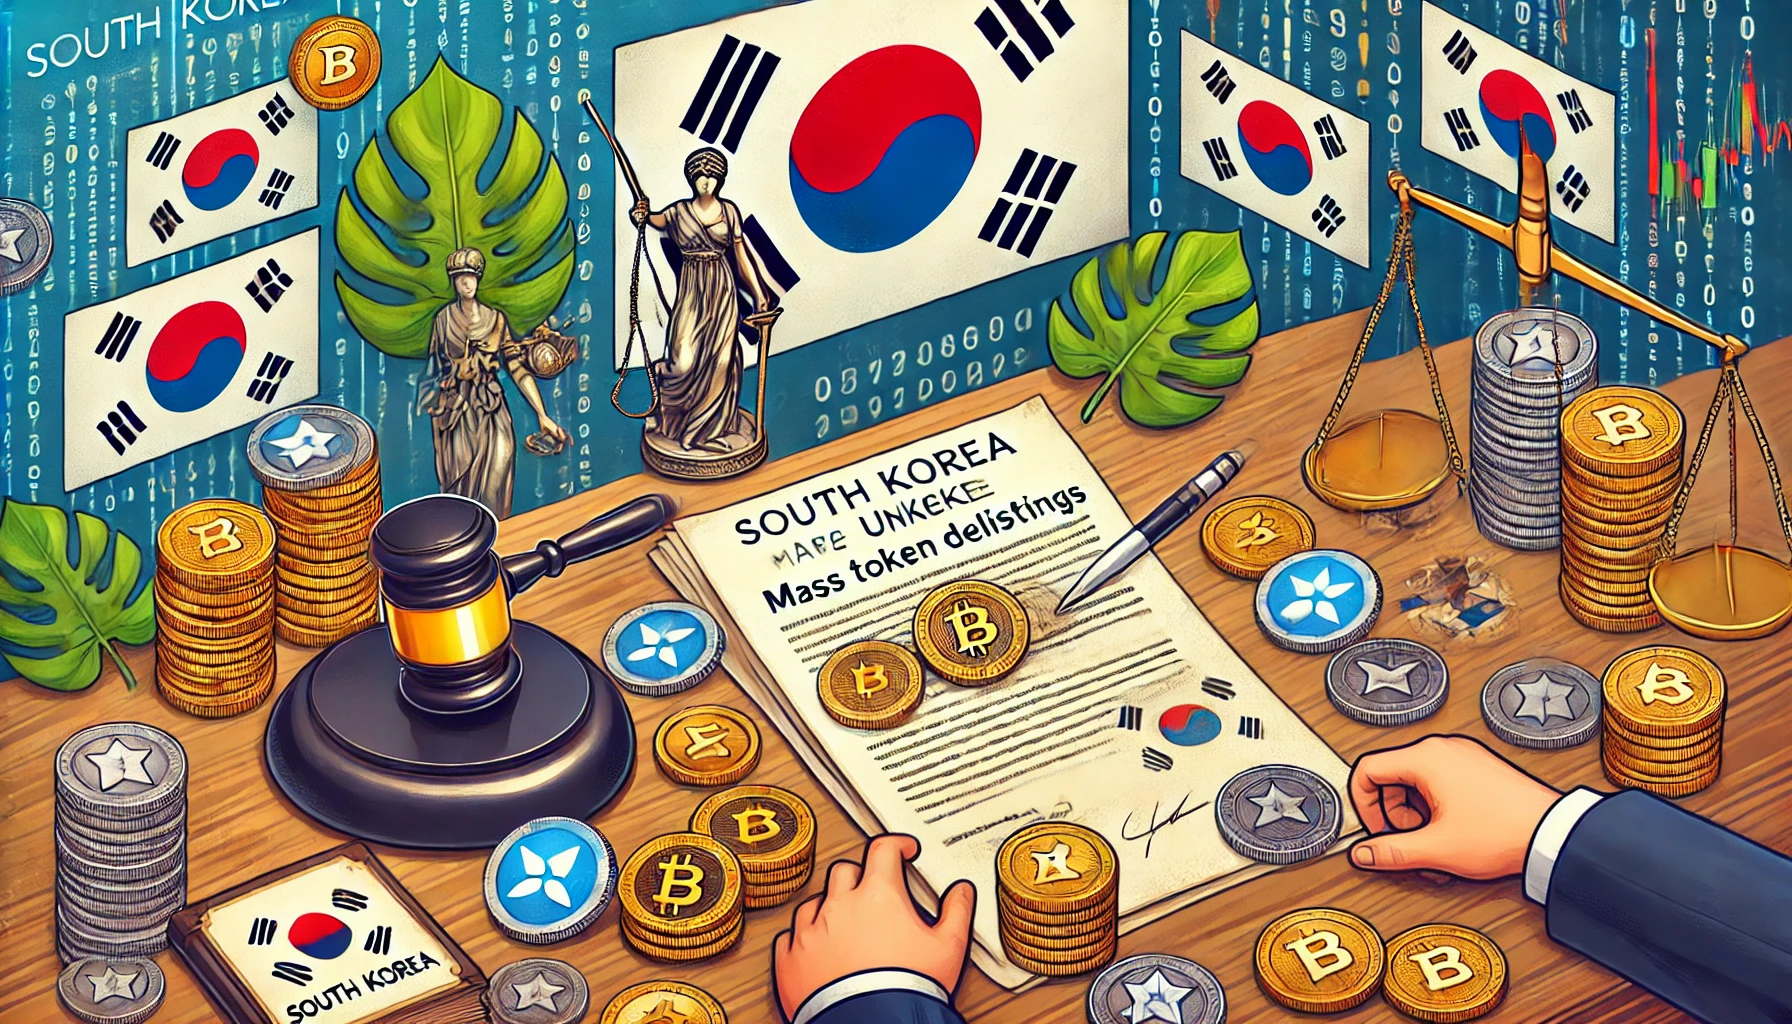 South Korea Crypto Body Says Mass Token Delistings ‘Unlikely’ Amid New Laws